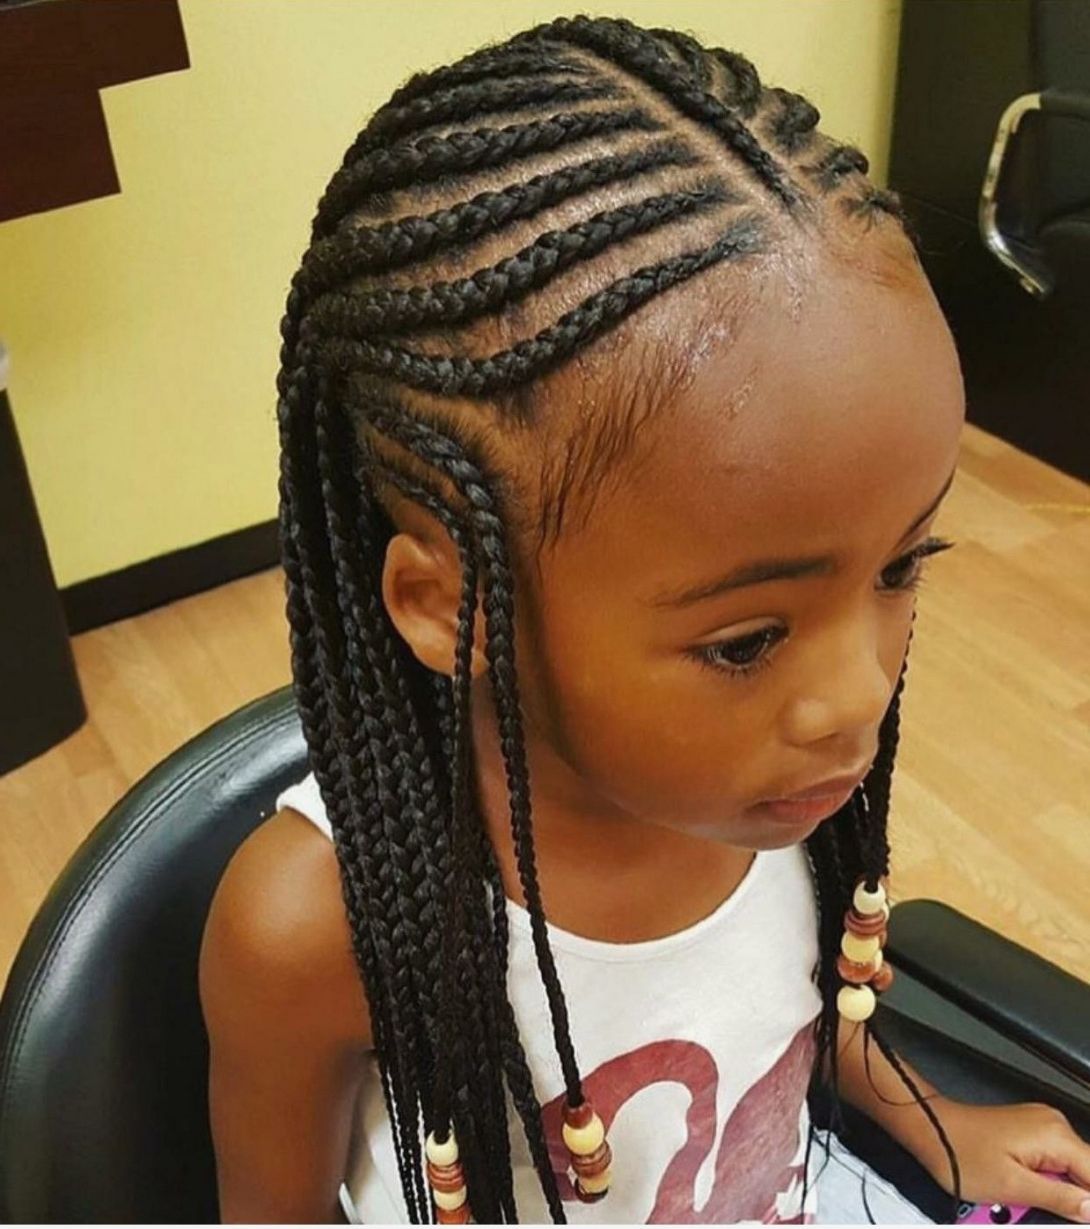 Exceptional Black Braided Hairstyles Cute For Natural Hair Quick In Current Black Braided Hairstyles (View 5 of 15)